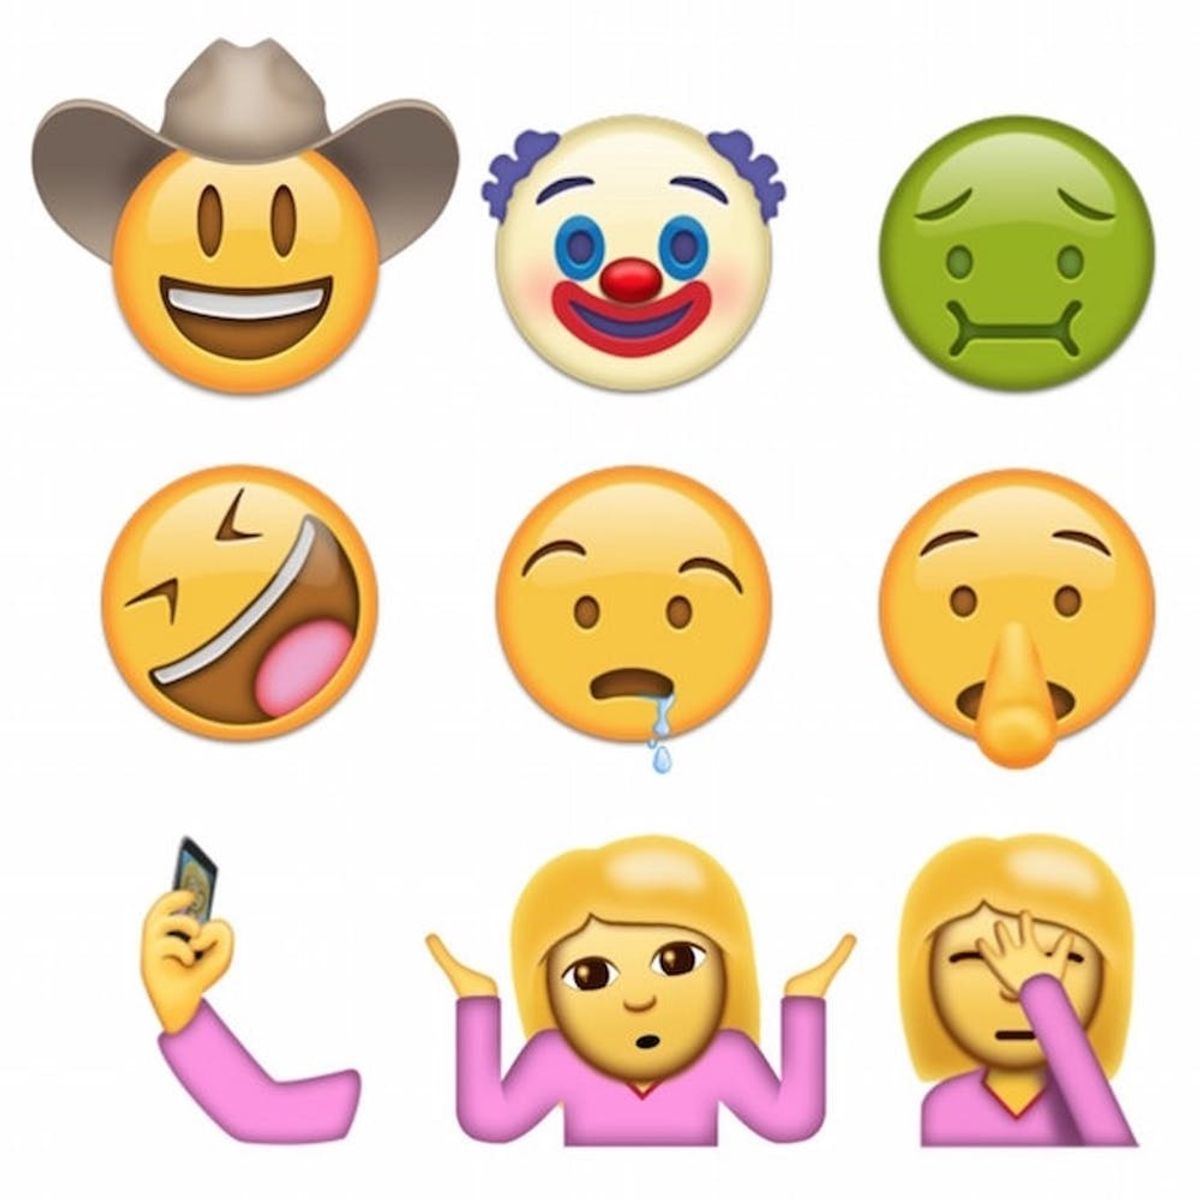 Preview the 38 New Emoji Coming to Your Phone